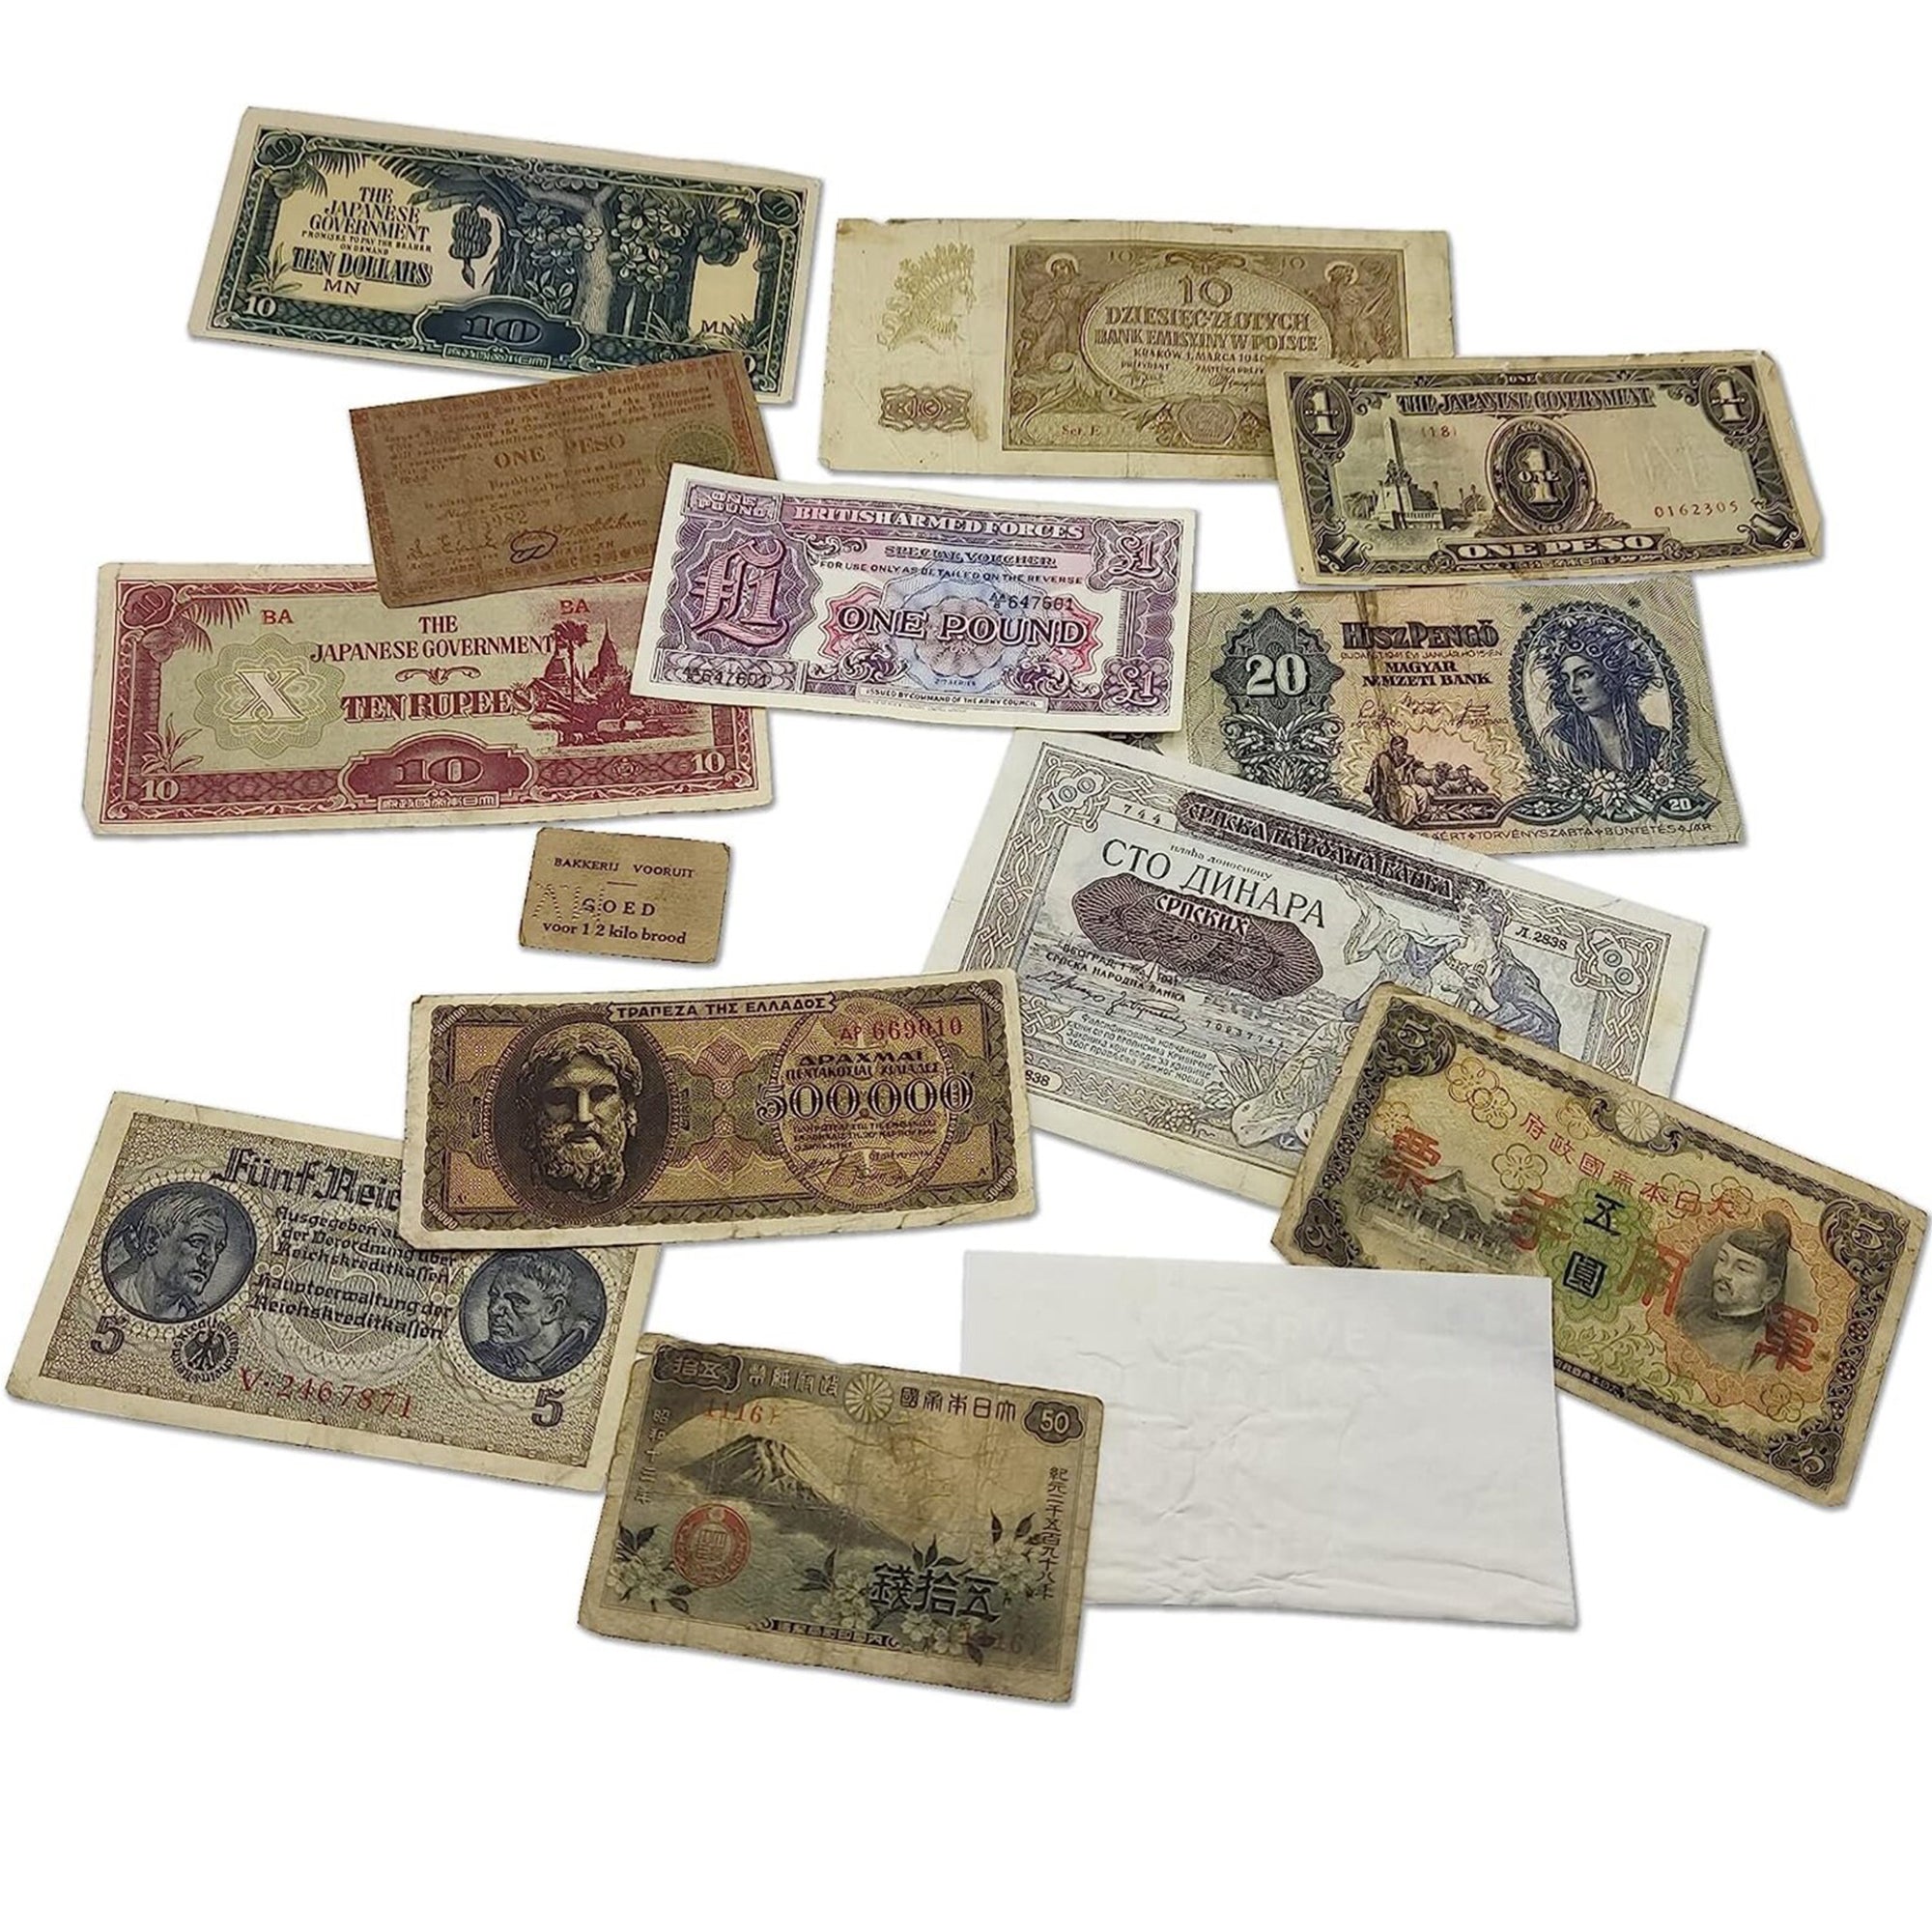 WW2 World Currency – Banknotes to Build Your Foreign Currency Collection – 14 Circulated Allied & Axis Powers Banknotes, Issued 1939-1945 – Banknotes Collection with Certificate of Authenticity